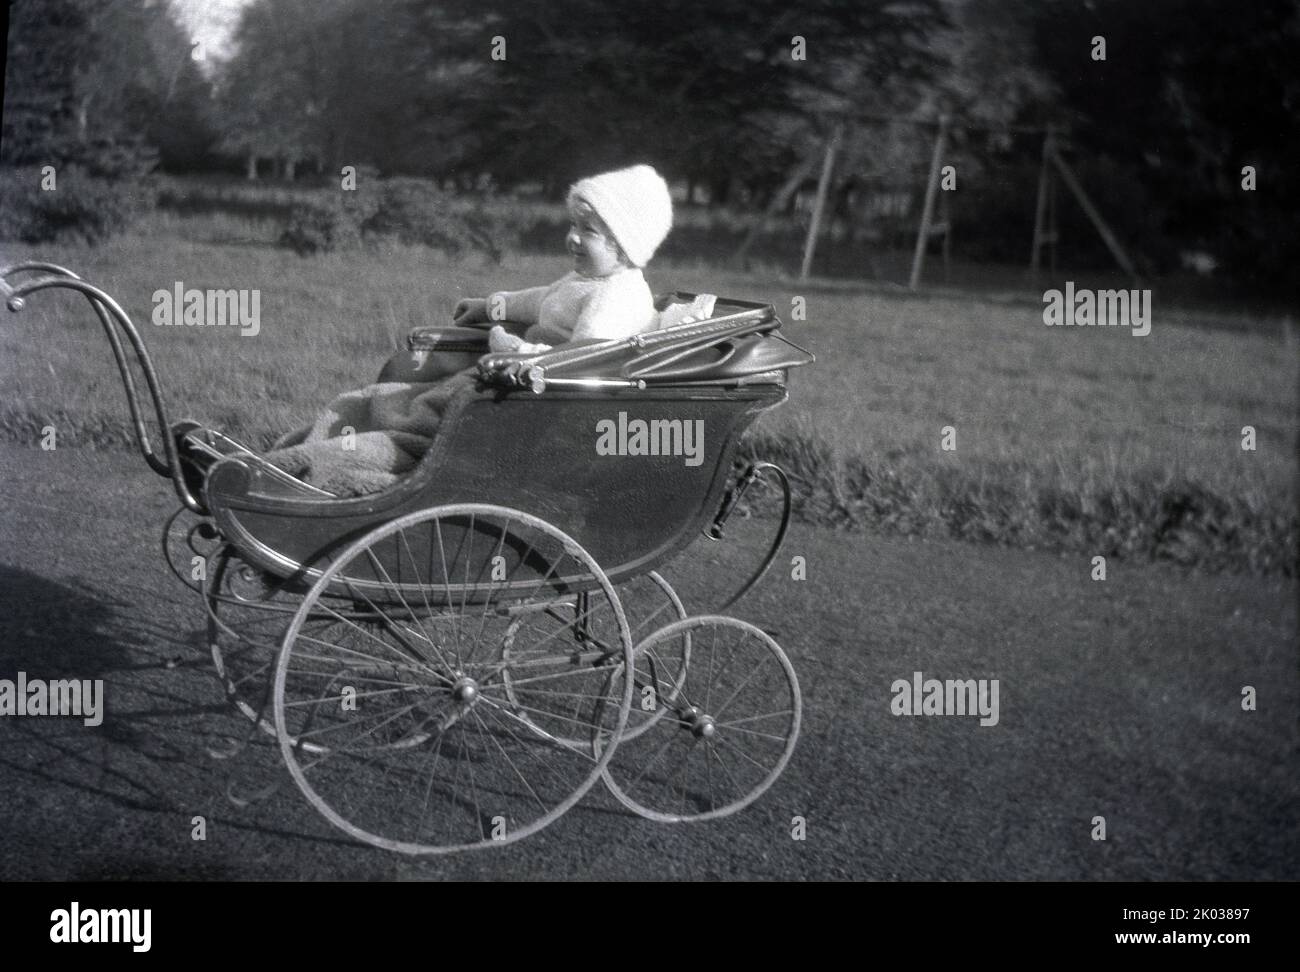 1929. historical, an infant girl sitting in a coach-built baby carriage or pram of the era, England, UK, with a wooden body and tyreless wheels. It is believed that the first baby carriage was invented in 1733 by English garden architect William Kent for the Duke of Devonshire as transport to amuse his children. it was a child's version of a horse-drawn carriage and became popular with the landed gentry of the day. Stock Photo